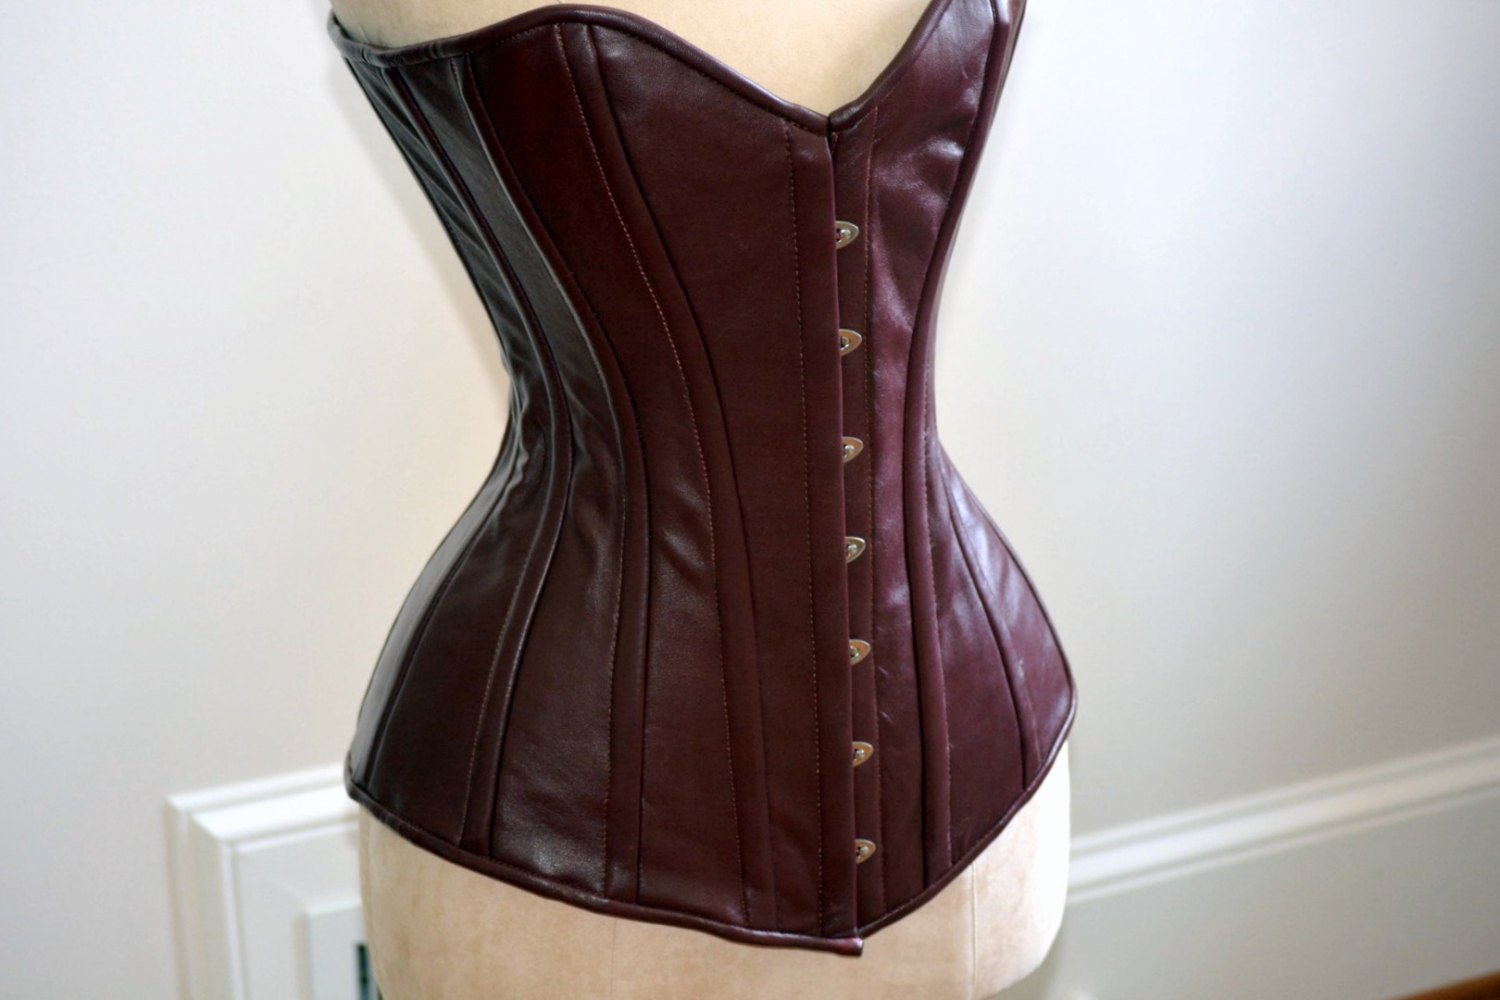 Long steel-boned corset, black, brown, white, red real leather